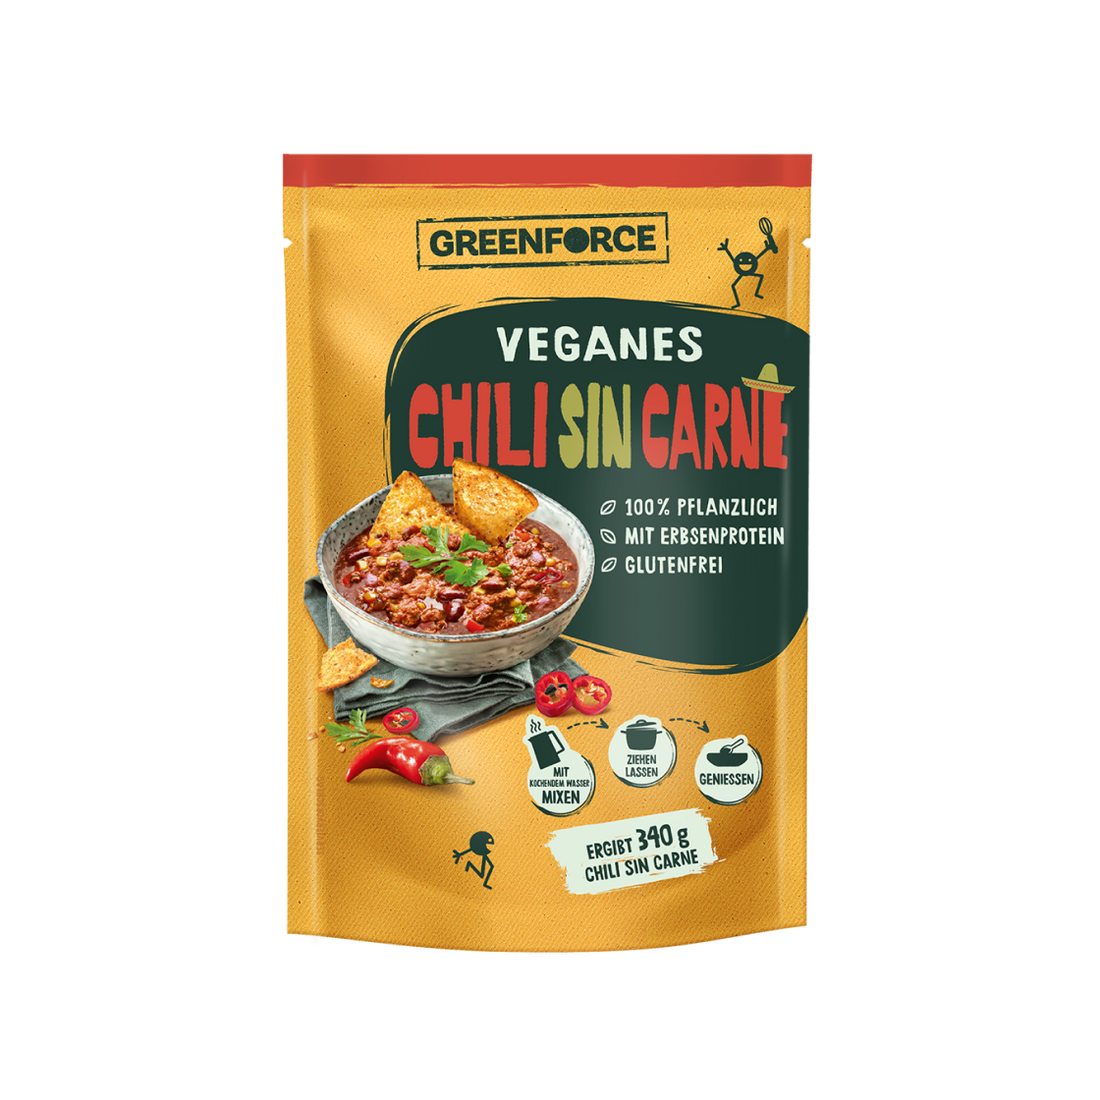 Easy to mix vegan chili sin carne